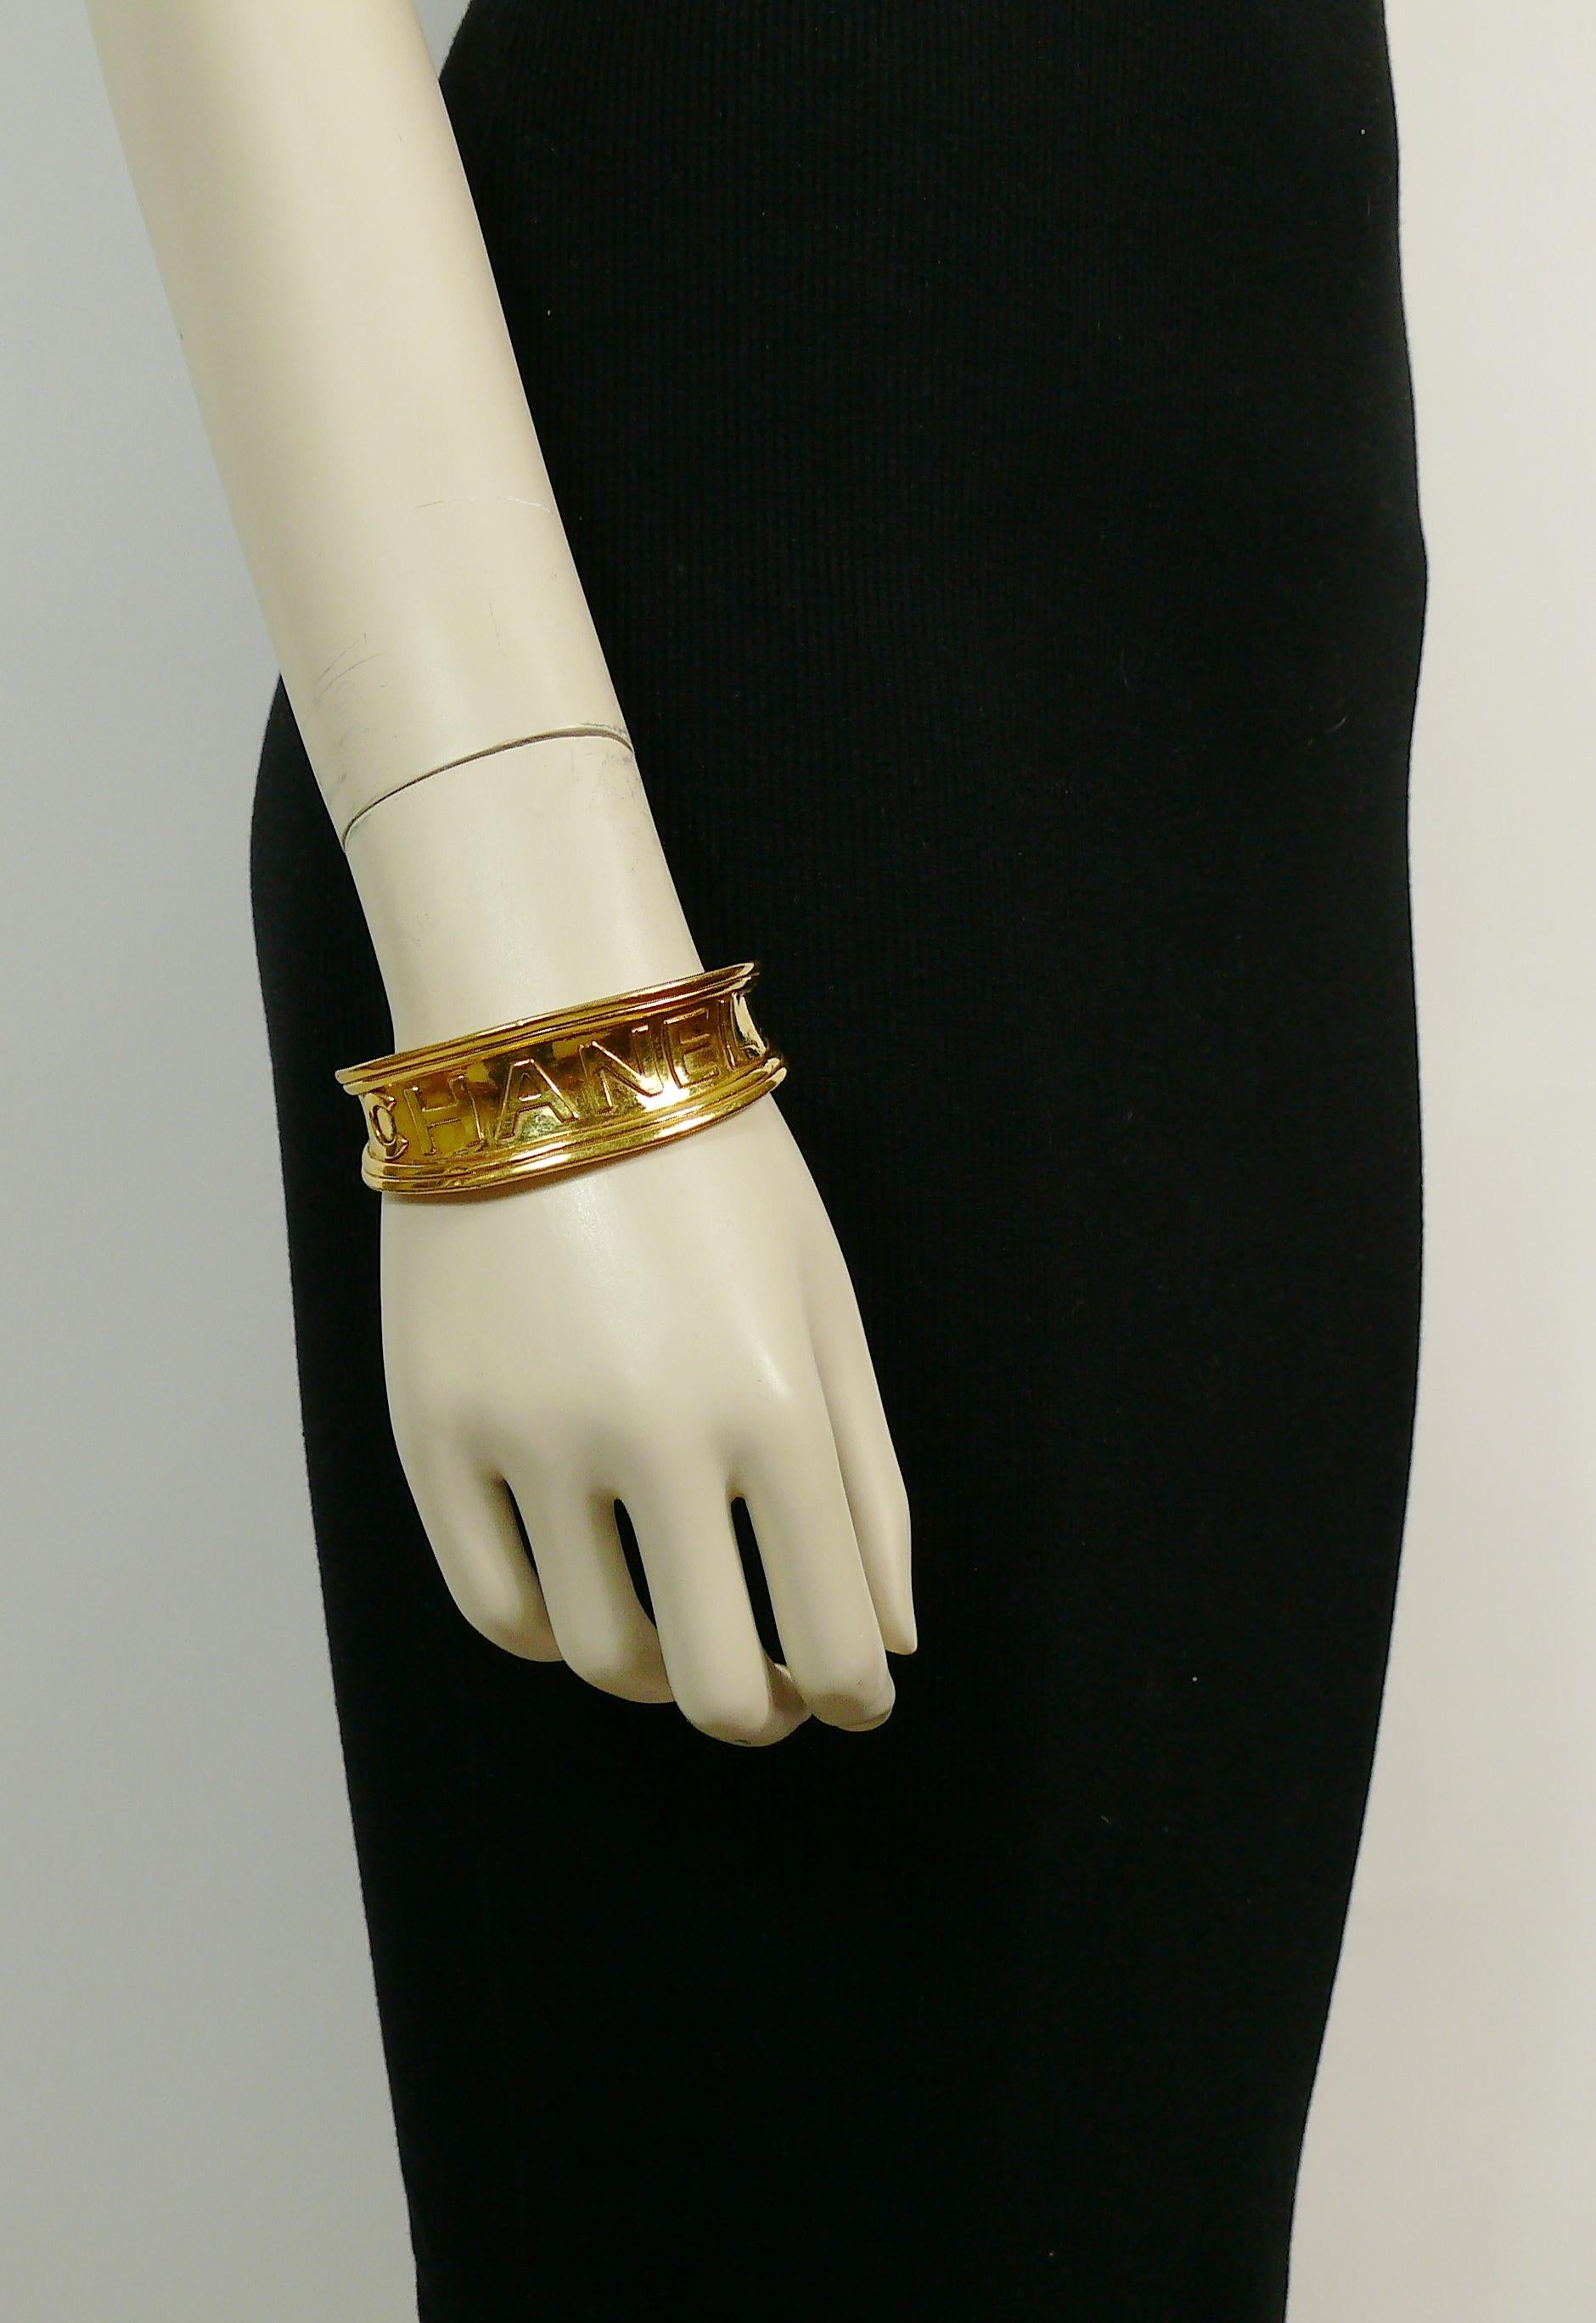 CHANEL vintage gold toned cuff bracelet featuring CHANEL letters script monogram.

From the Spring/Summer 1996 Collection.

Embossed CHANEL 96 P Made in France.

Indicative measurements : inner measurements approx. 6 cm x 4.2 cm (2.36 inches x 1.65